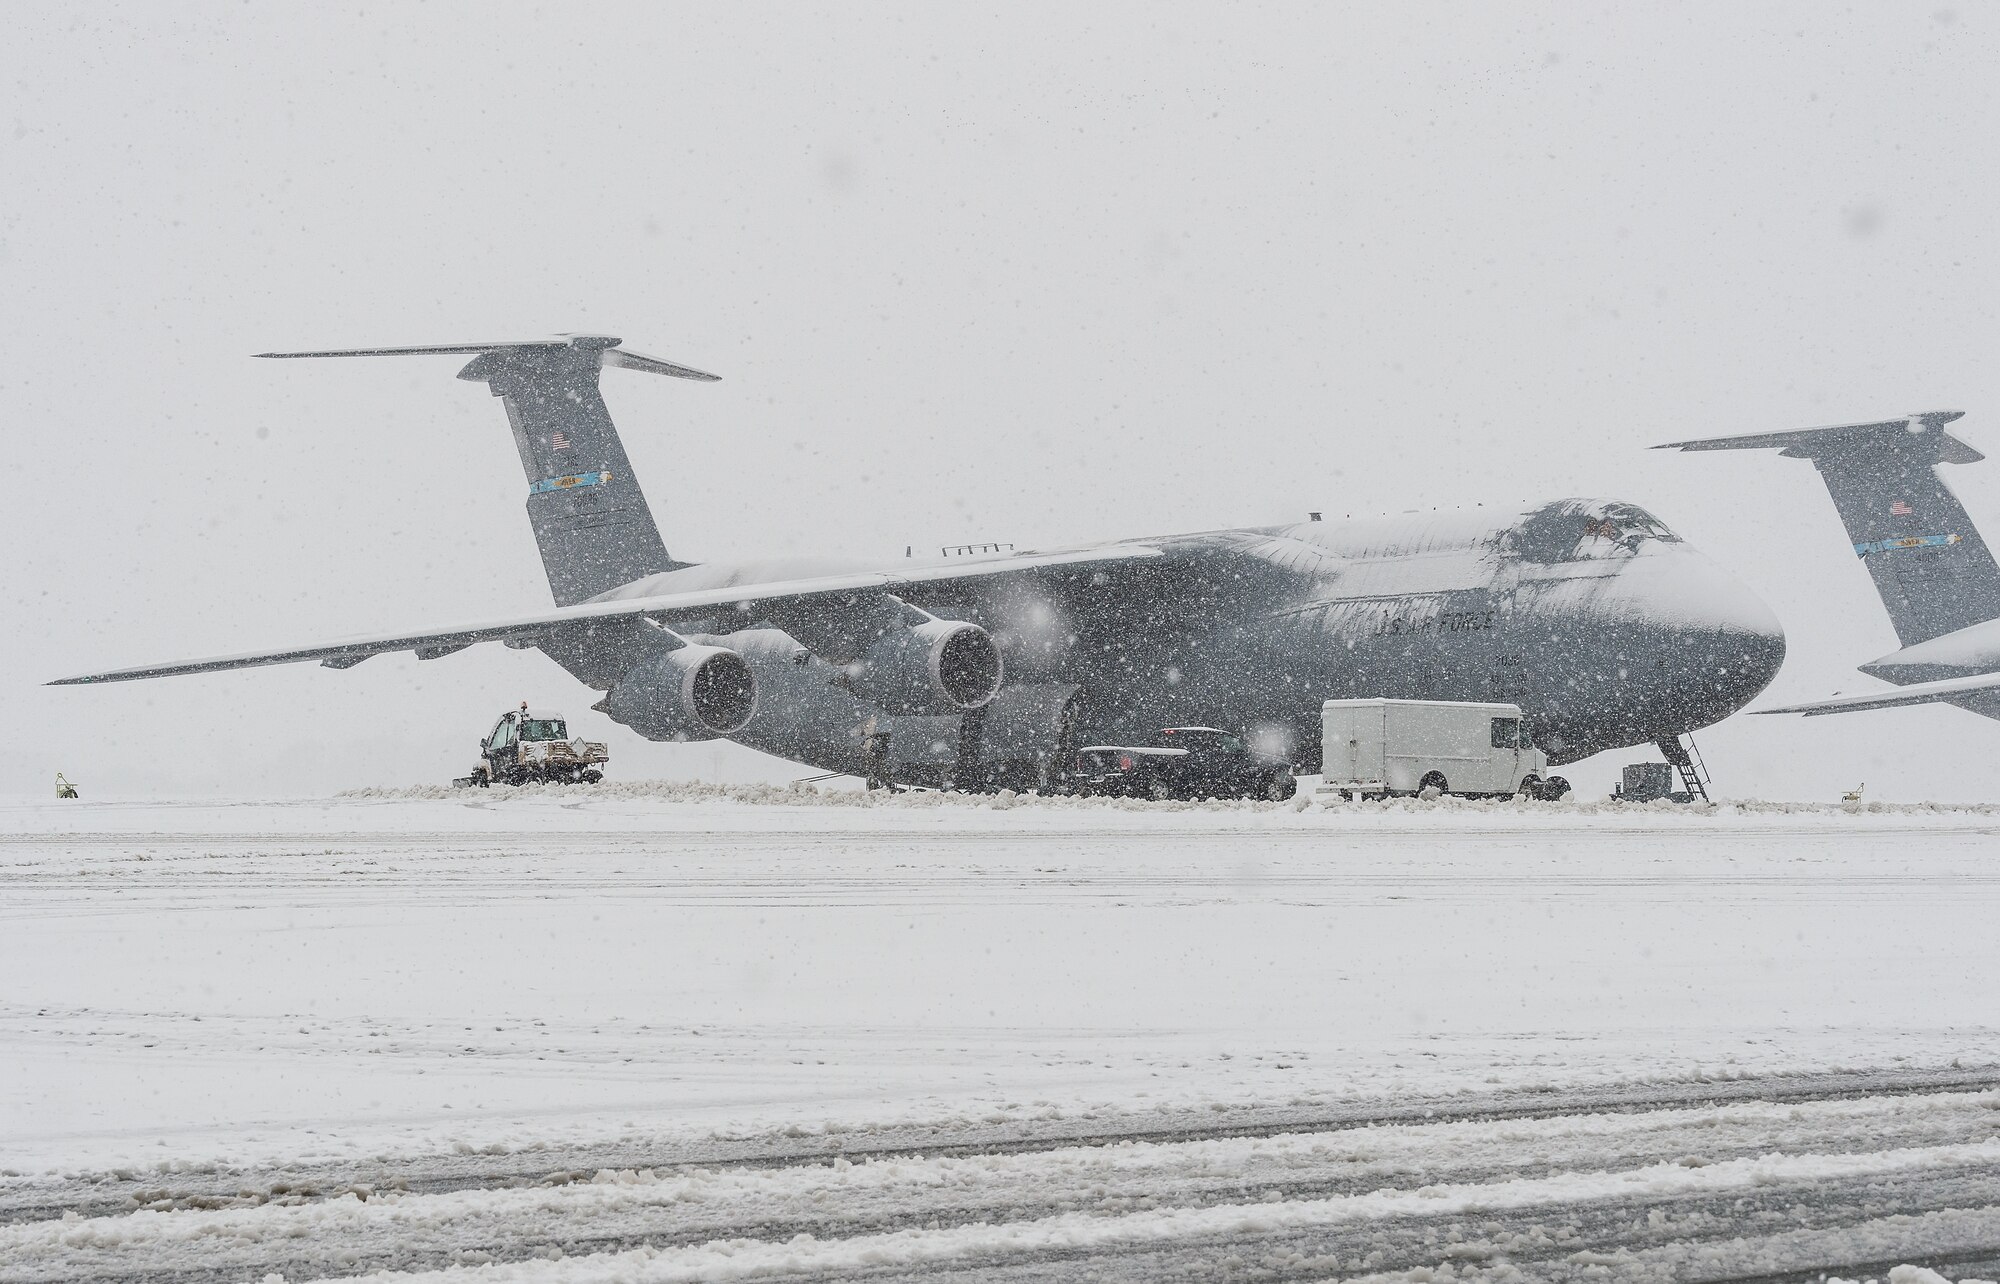 A snow-covered C-5M Super Galaxy being prepared for takeoff sits on the flight line at Dover Air Force Base, Delaware, Feb. 11, 2021. As Winter Storm Roland produced a wintry mix of precipitation, the base continued normal operations and prepared for additional forecast snowfall. (U.S. Air Force photo by Roland Balik)